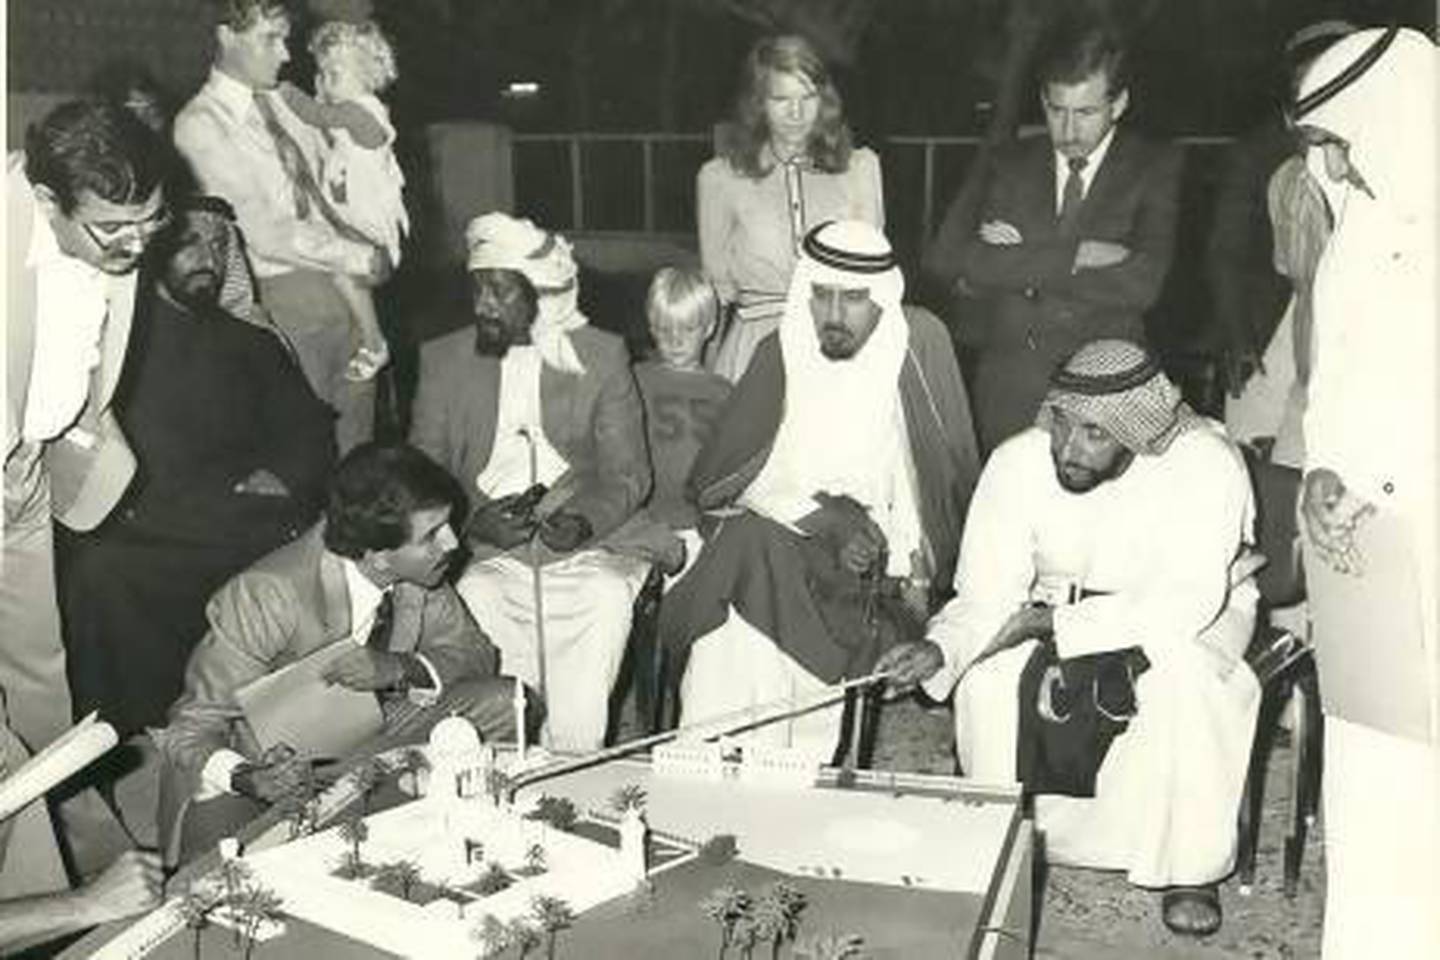 Frauke Heard-Bey stands behind Sheikh Zayed in 1980. Her husband, David, is on the left, along with her two kids. Photo courtesy of Frauke Heard-Bey.